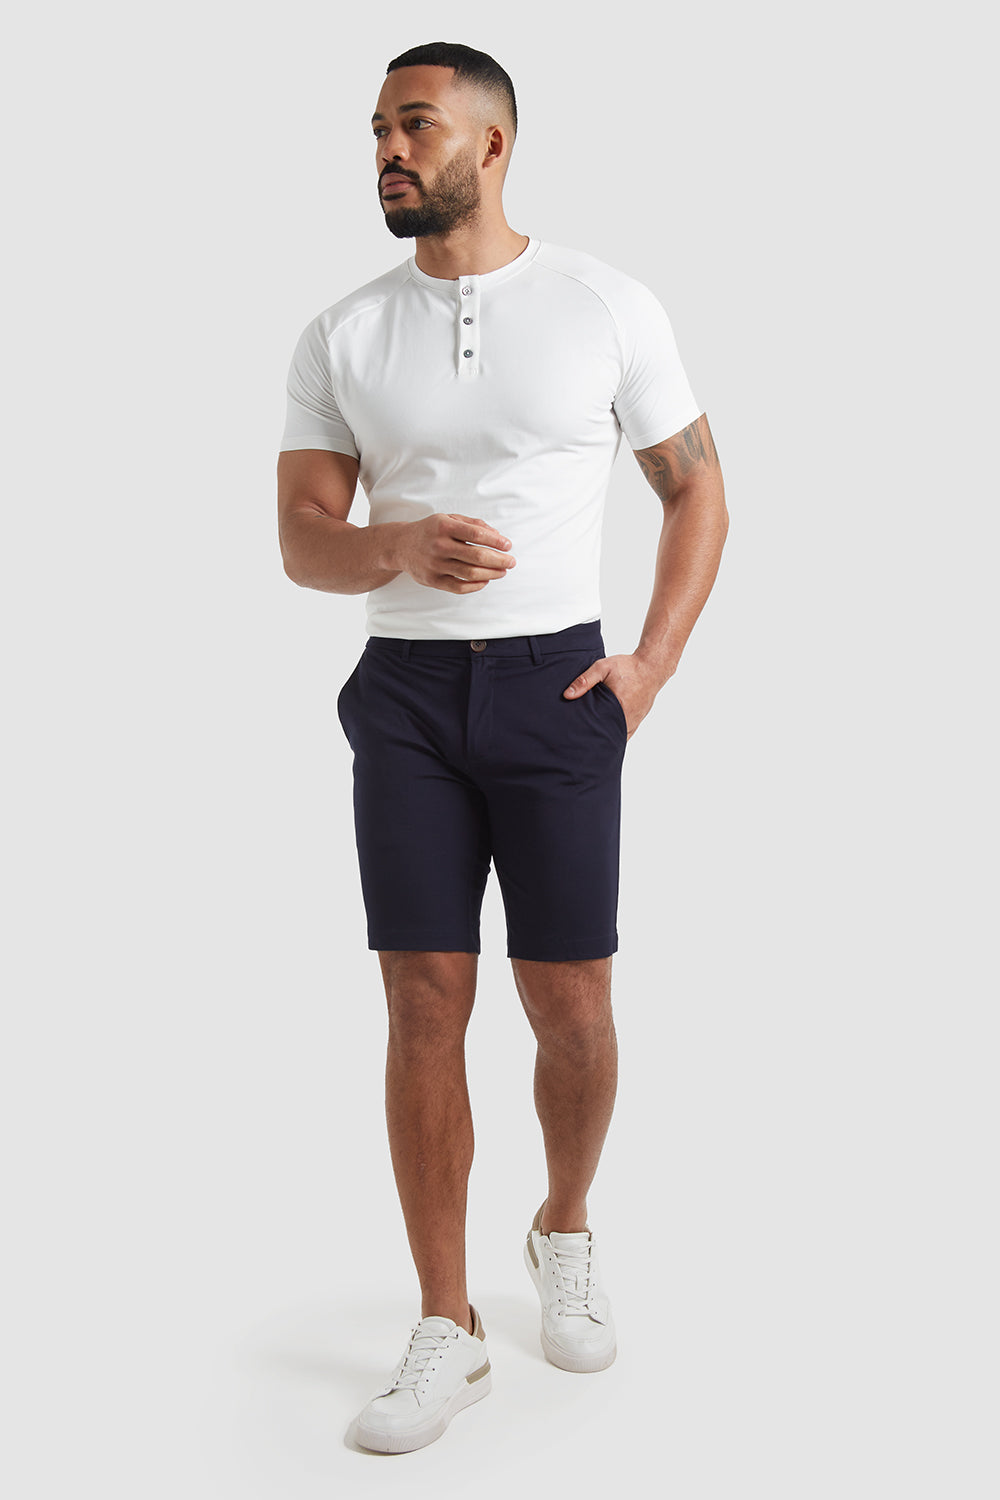 - Chino Navy in USA - Athletic TAILORED Shorts Fit ATHLETE